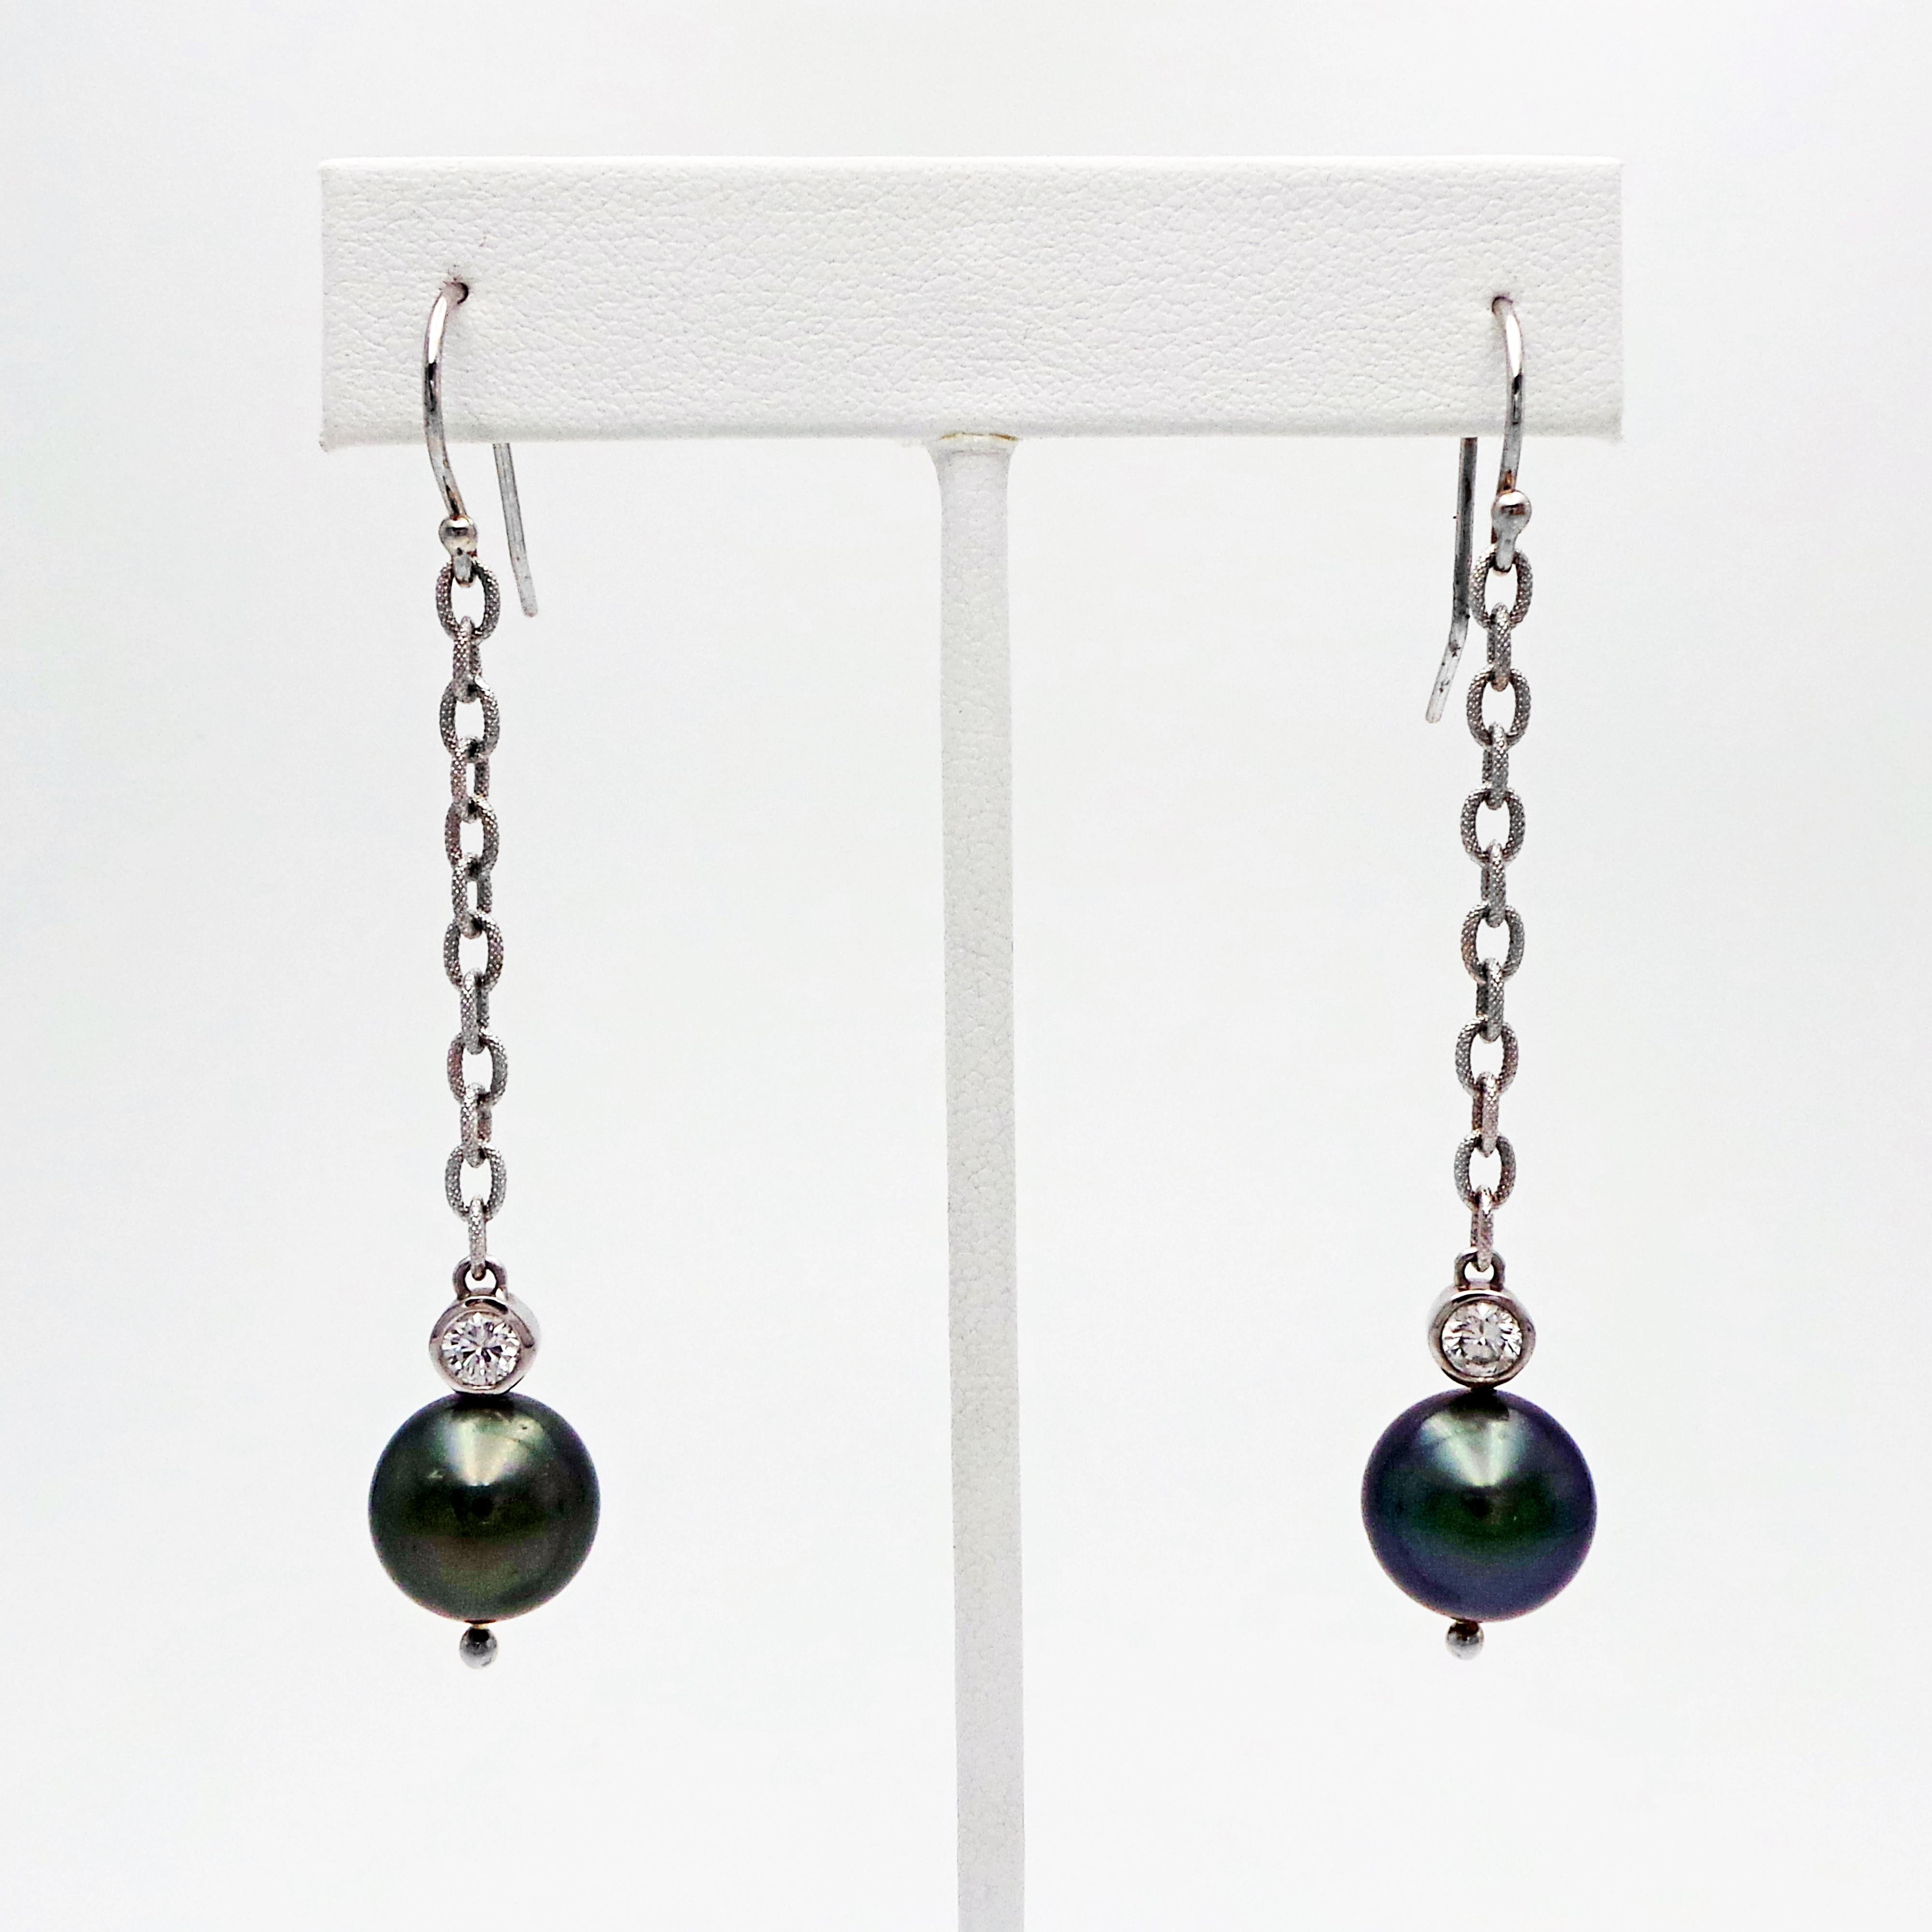 Tahitian Pearl, Diamond, and 14k white gold dangle drop earrings are a contemporary yet timeless style. Round Tahitian Pearls (13mm) and bezel set Diamonds (0.60 total carat weight, SI1 clarity, G-H color) are suspended from solid 14k white gold